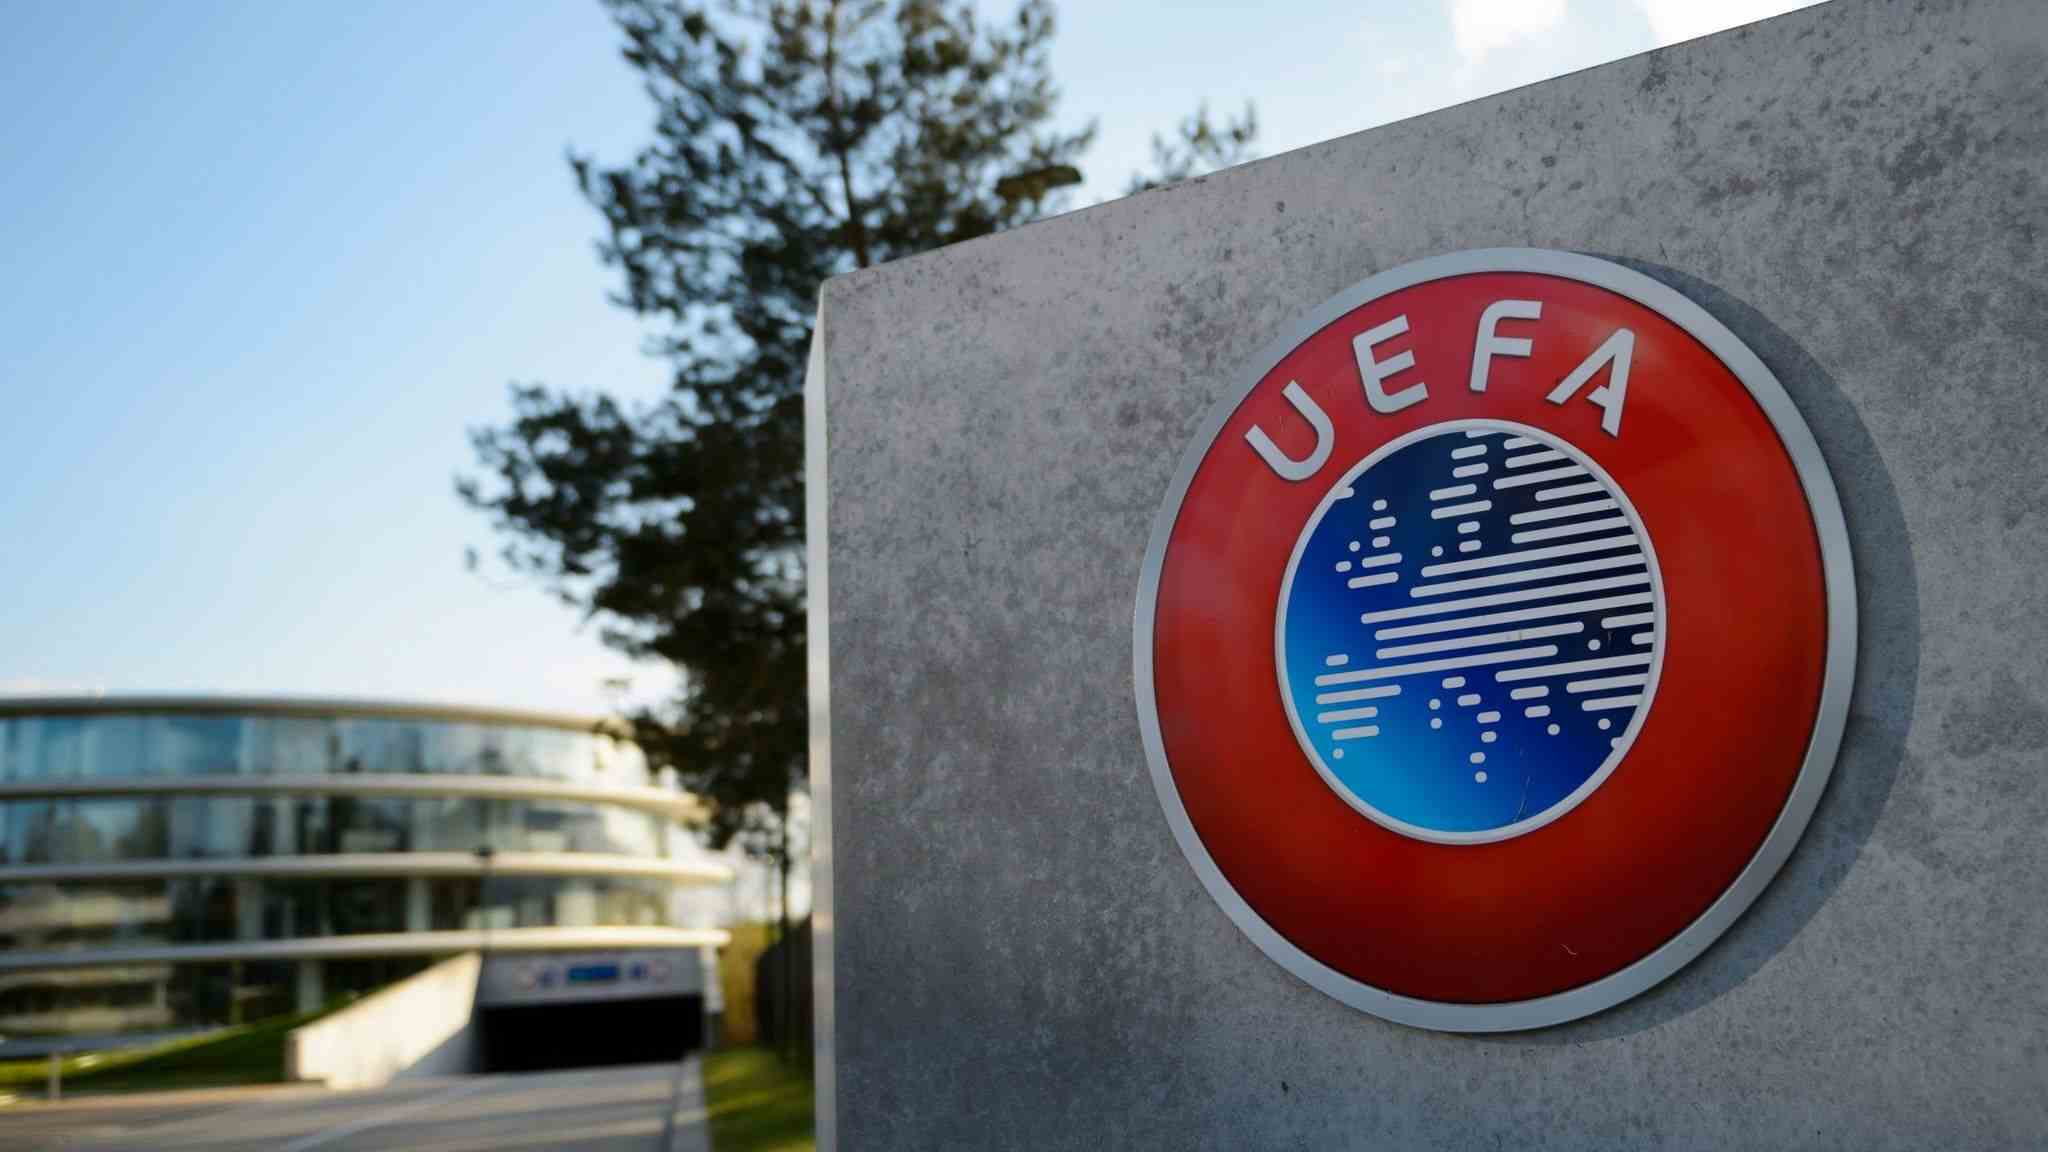 UEFA financial fair play rules to be ripped up after Covid crisis(1)